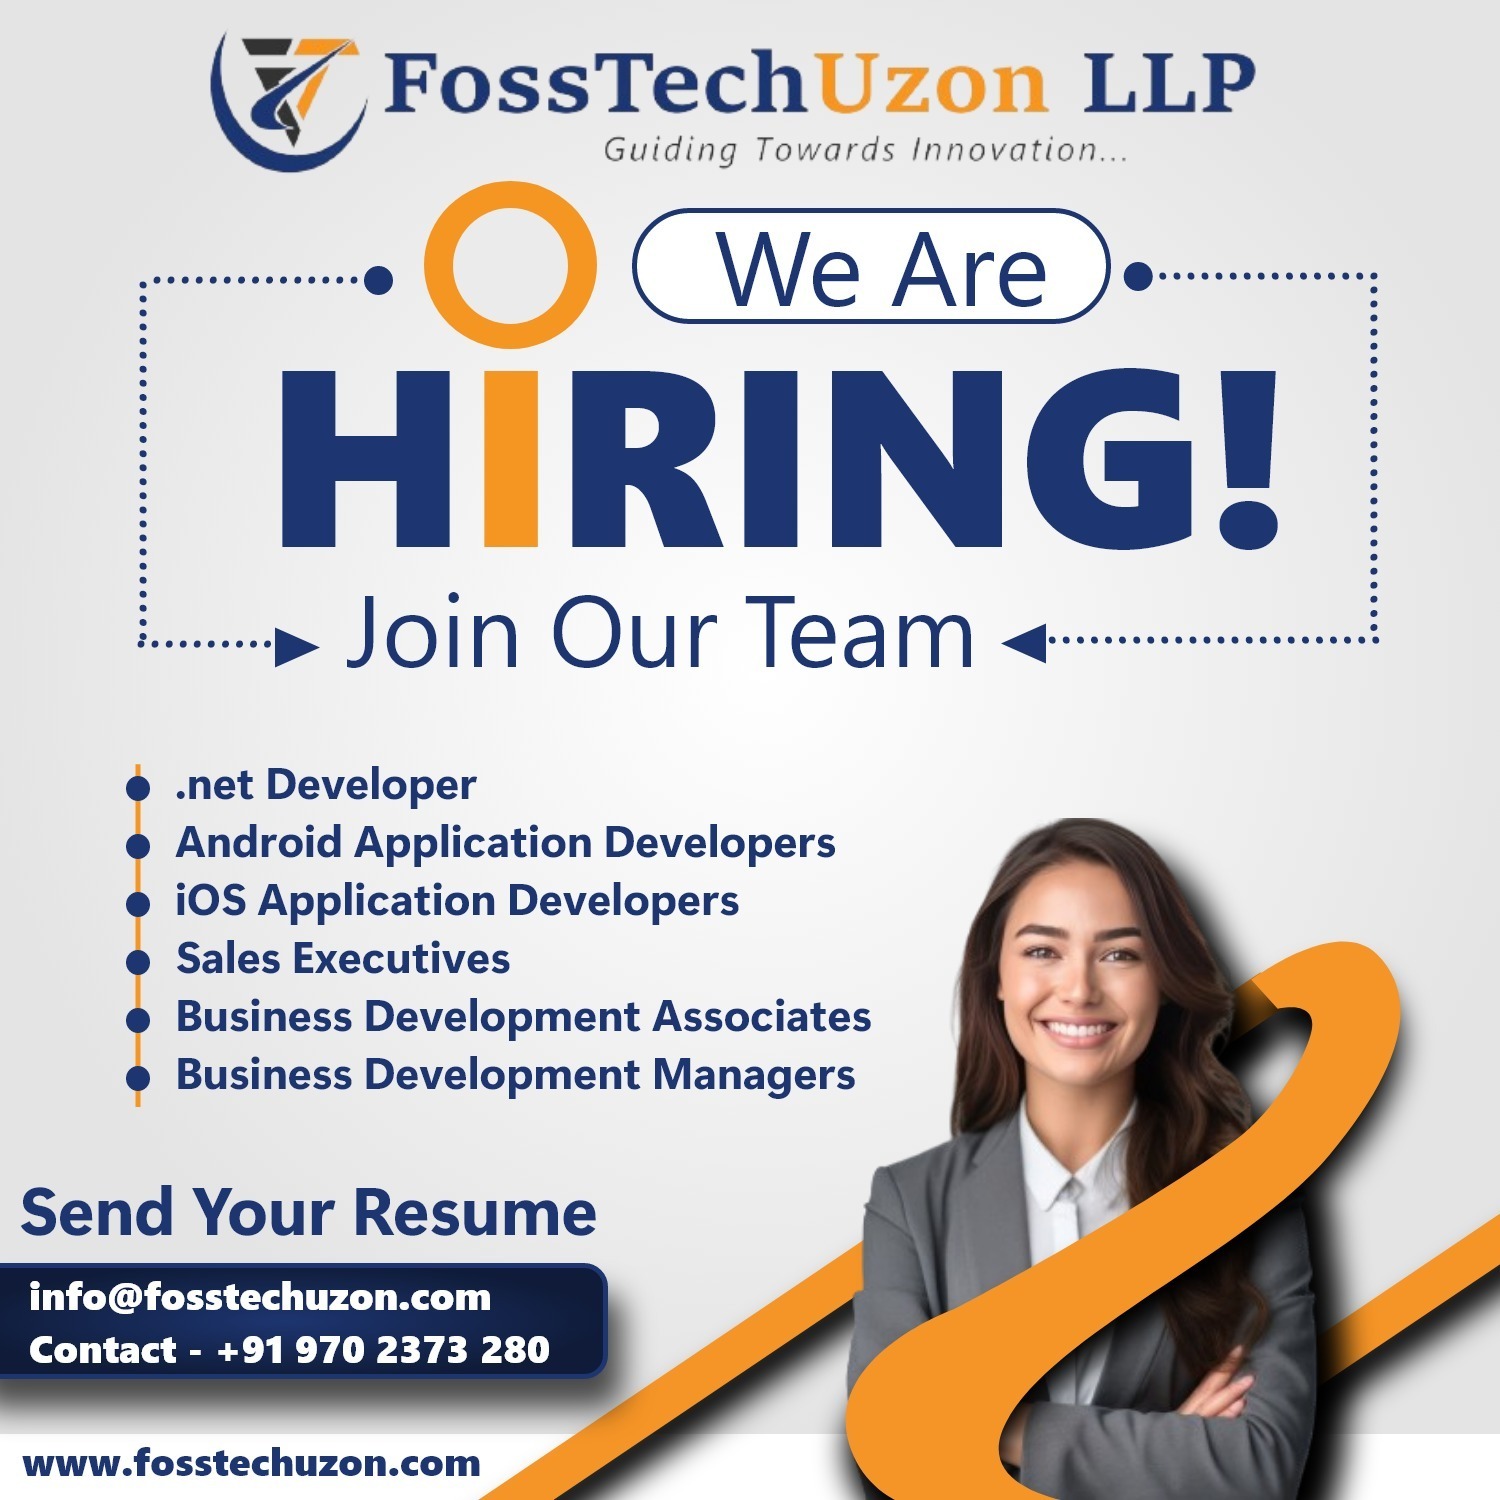 At FossTech Uzon LLP, we are dedicated to pioneering innovative solutions that drive progress in technology